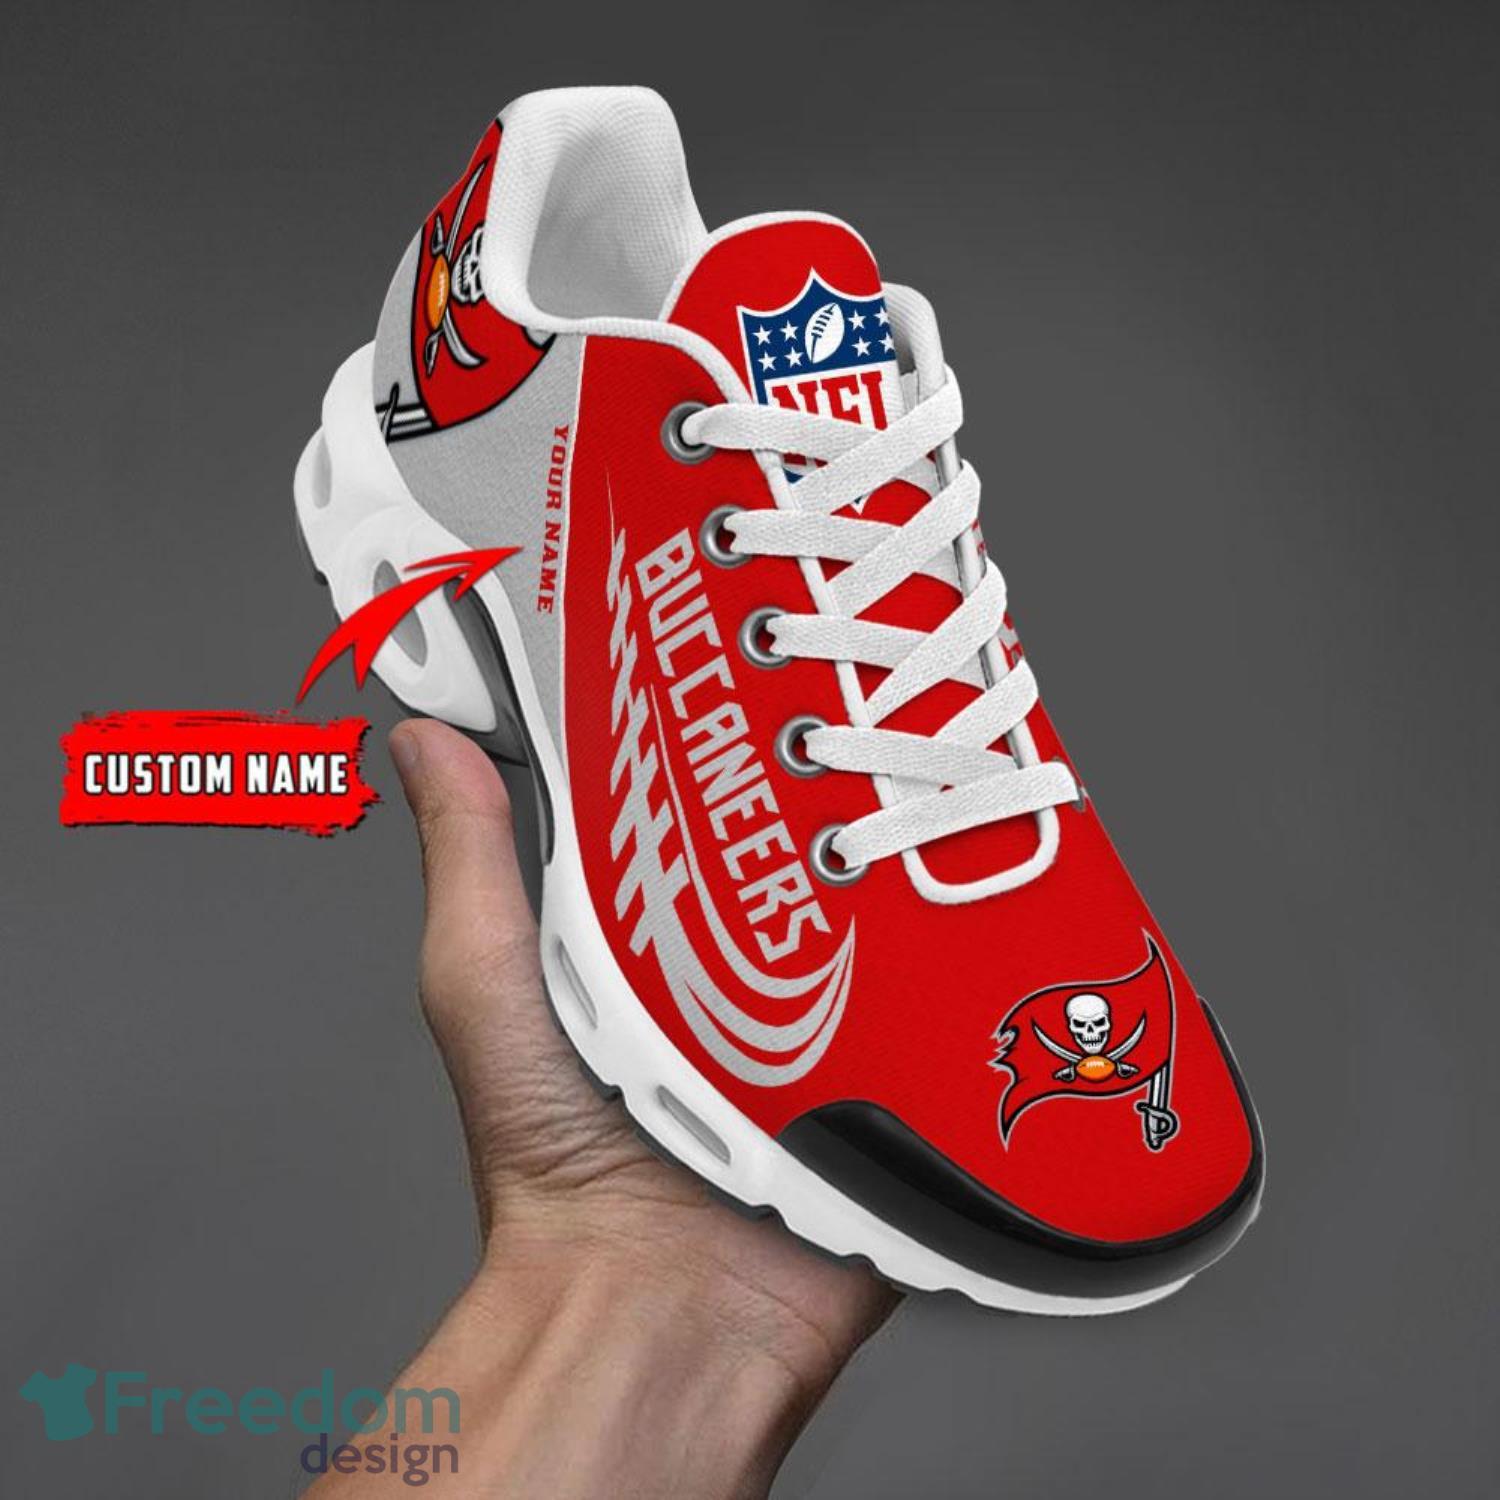 Tampa Bay Buccaneers Custom Name Air Cushion Sport Shoes For Fans Product Photo 1